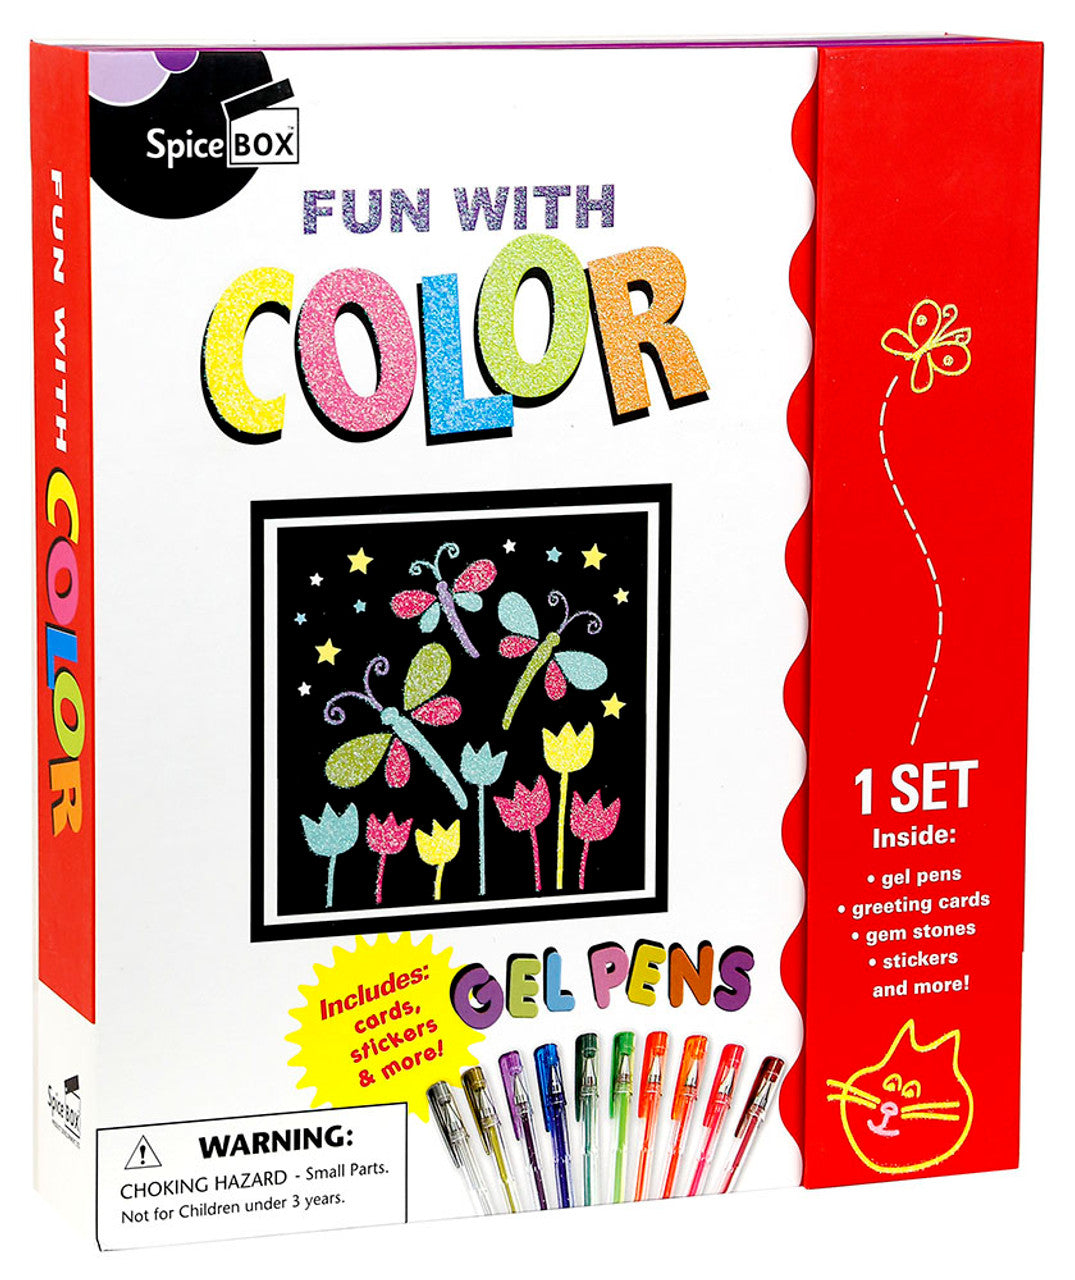 Spicebox Fun With Color - Gel Pens